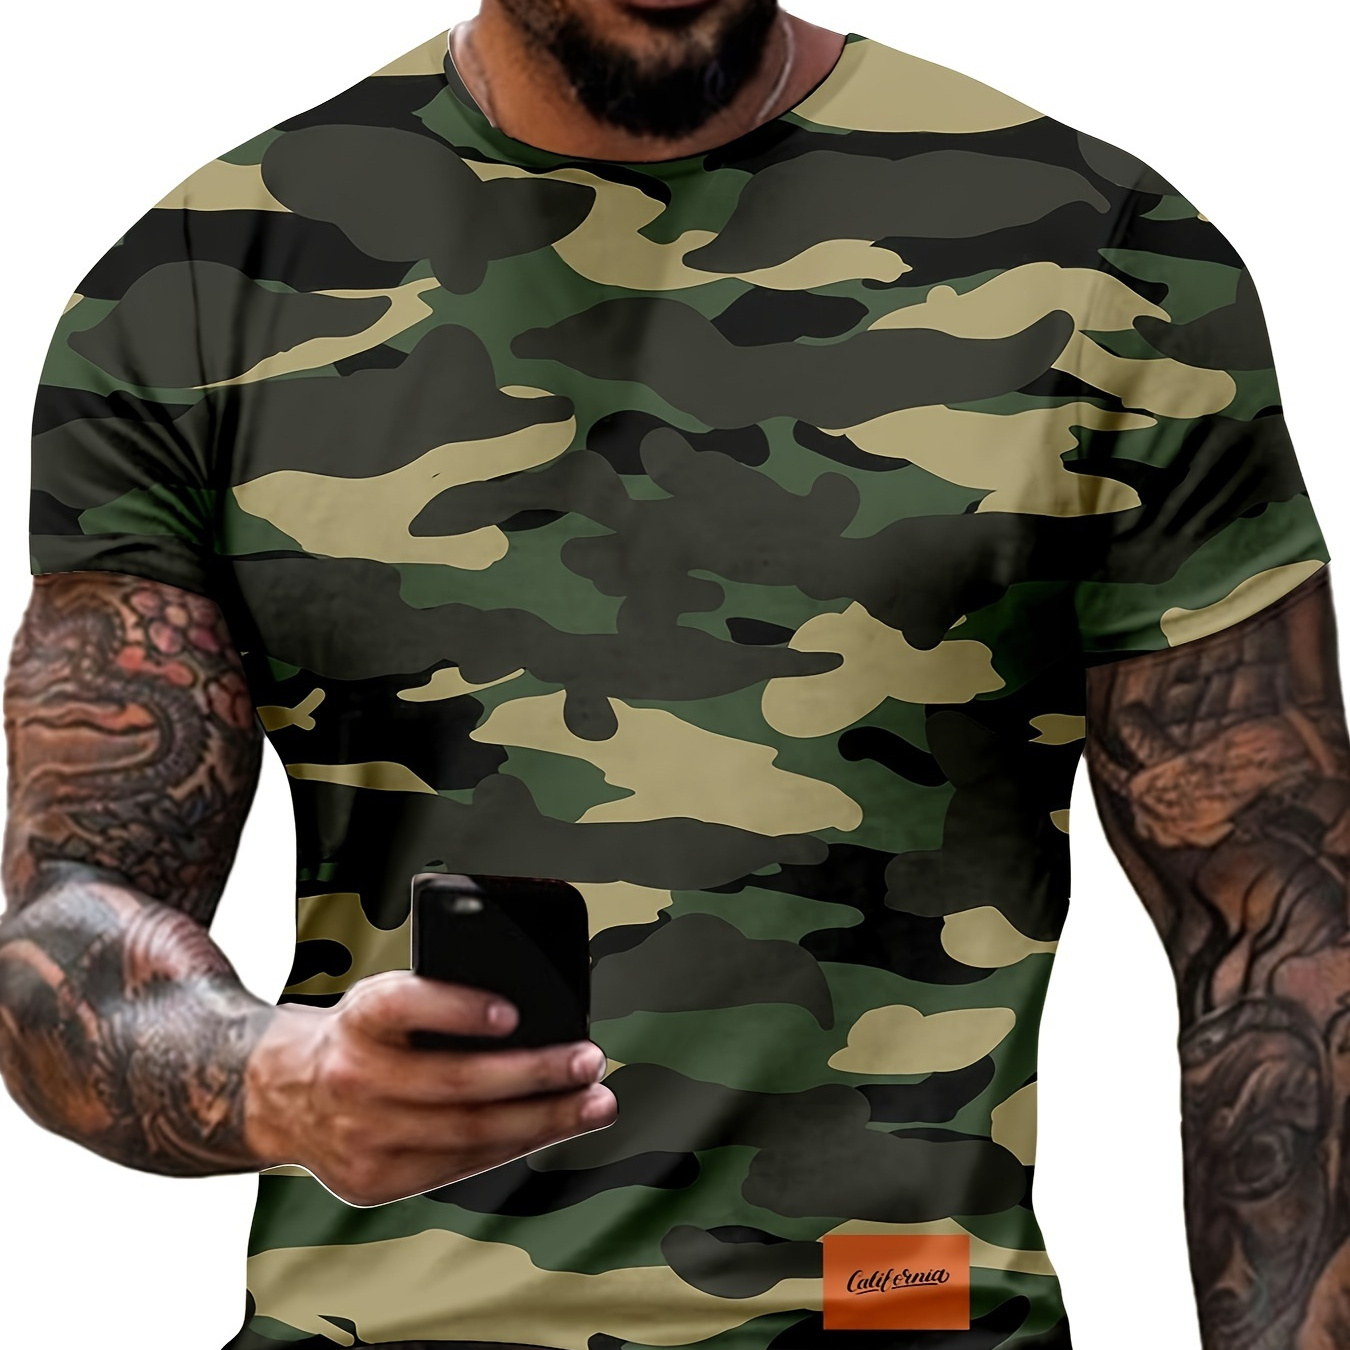 

Men's Camouflage Graphic Print T-shirt, Casual Short Sleeve Crew Neck Tee, Men's Clothing For Summer Outdoor